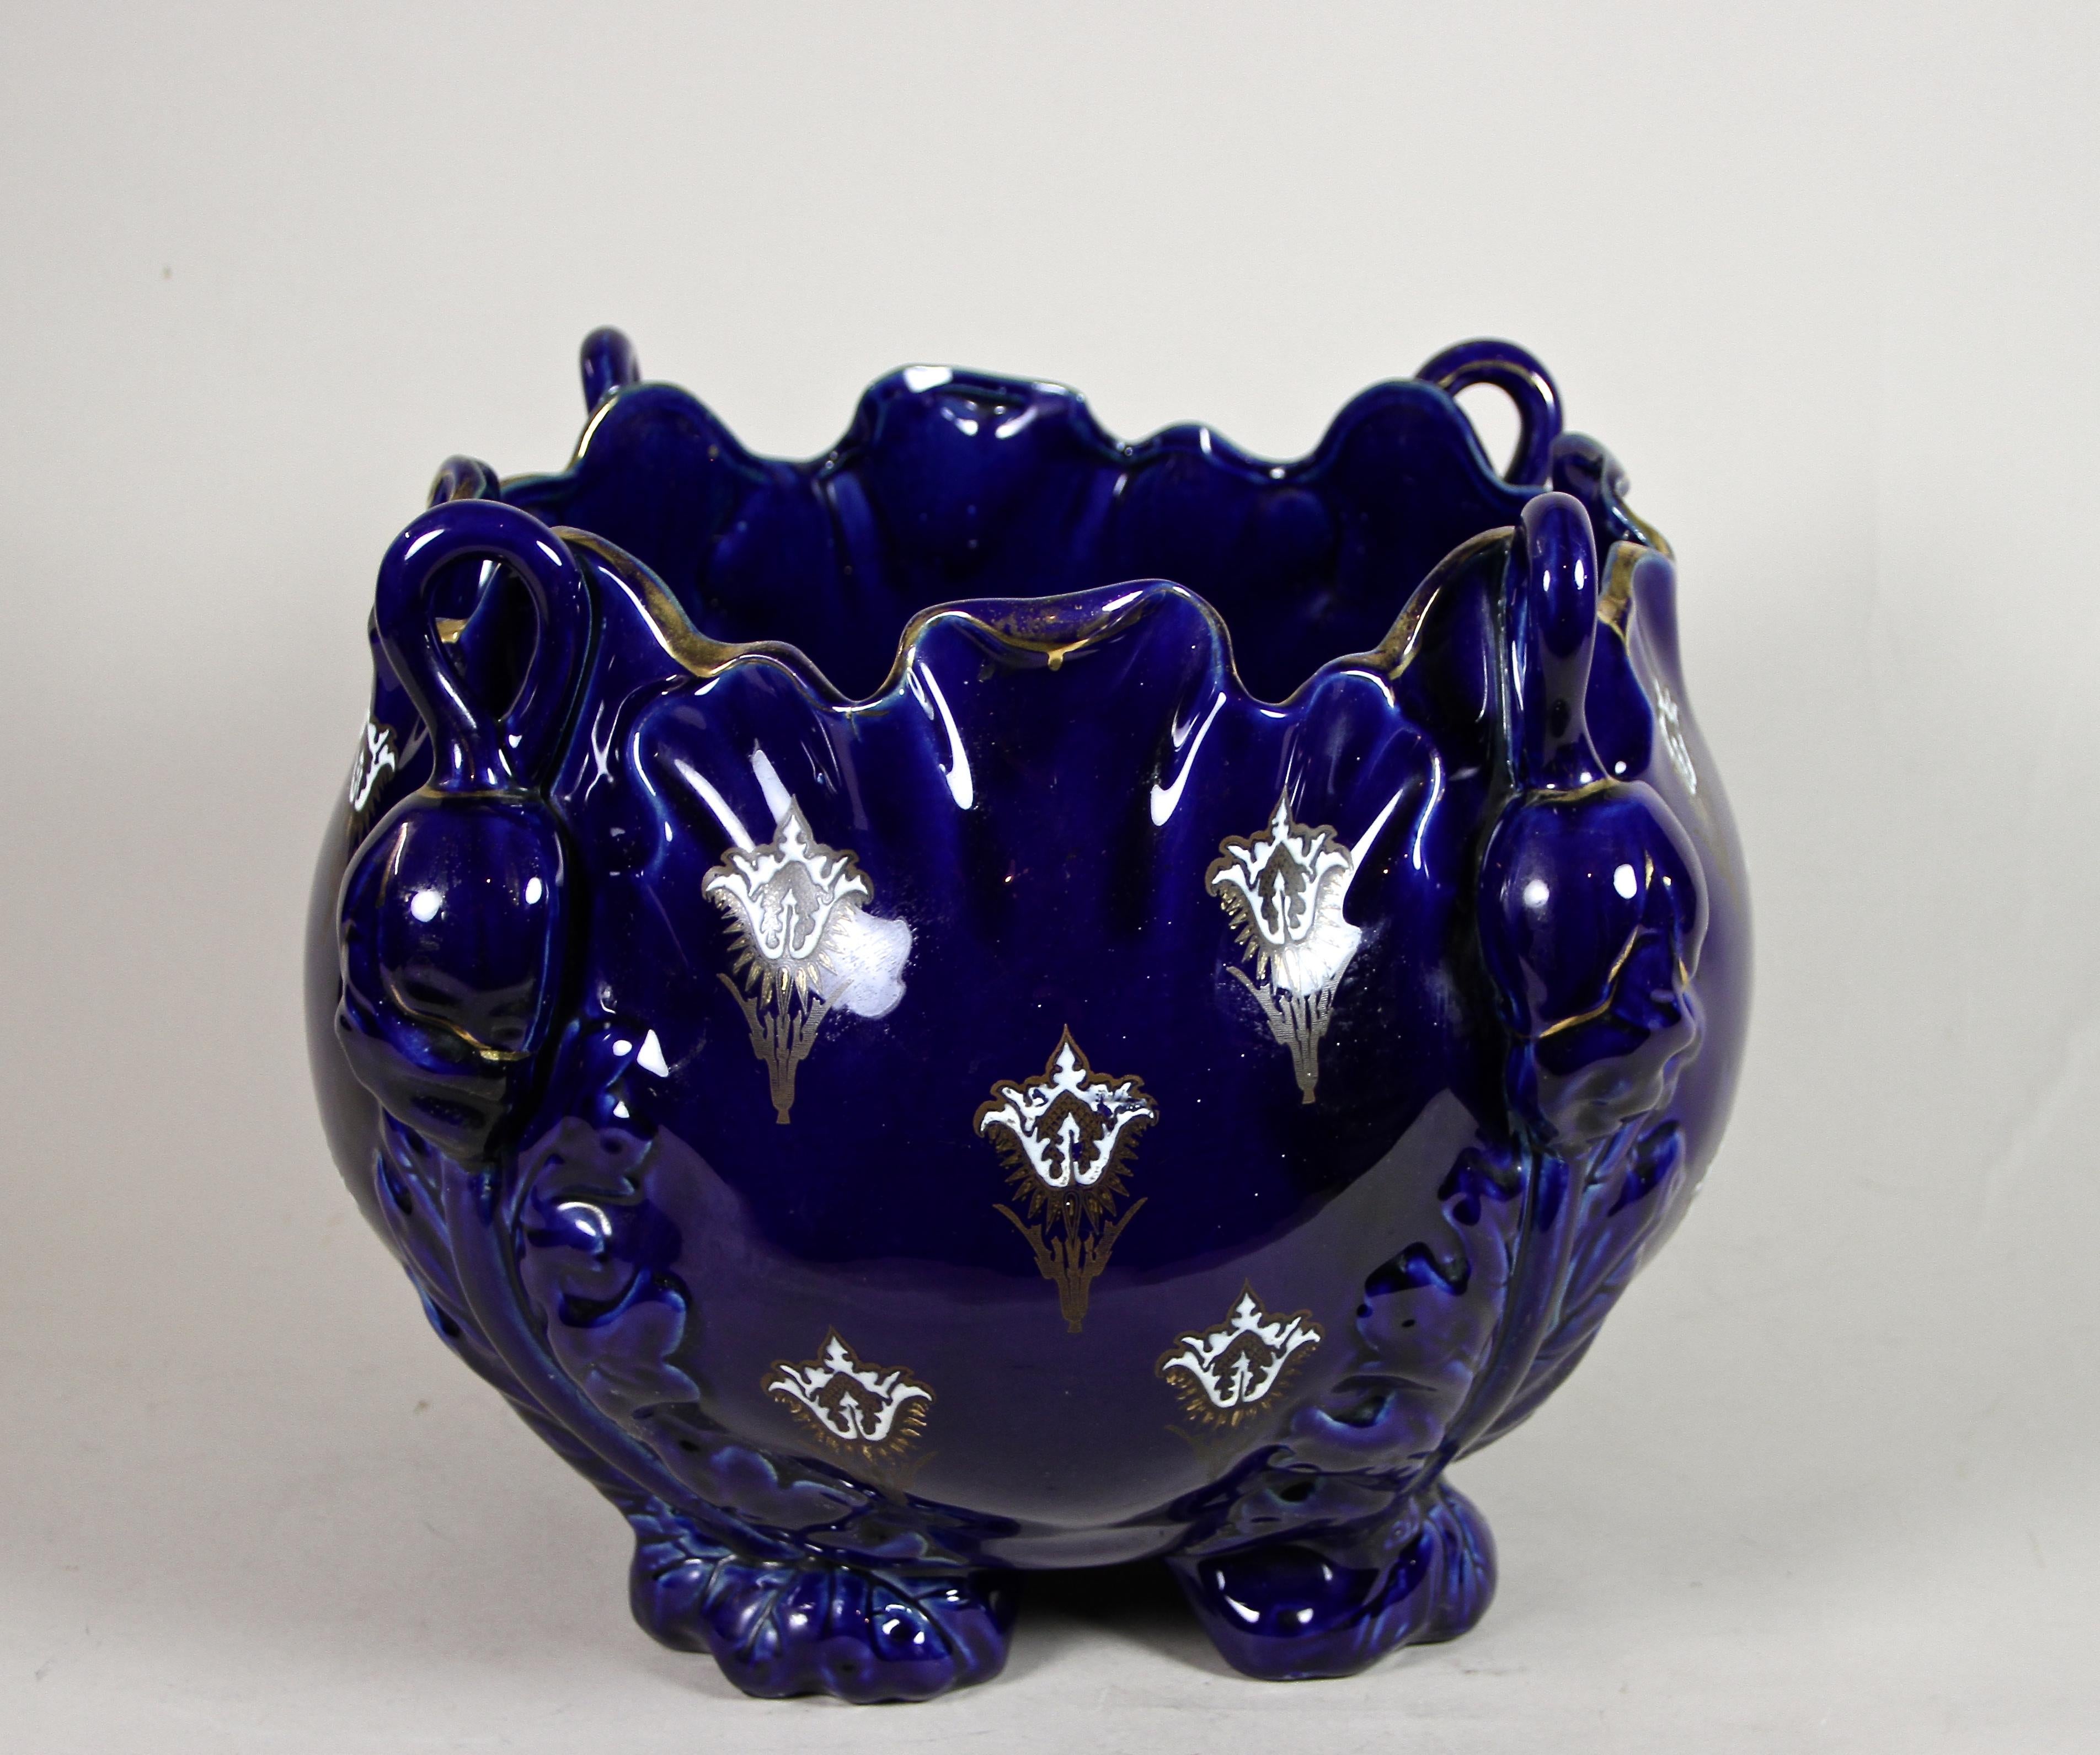 Extraordinary, large Art Nouveau ceramic Cachepot from the period in France around 1915, made by the famous company of K&G Luneville. This rare, dark cobalt blue cachepot impresses with an unusual shaped body and its beautiful floral design showing